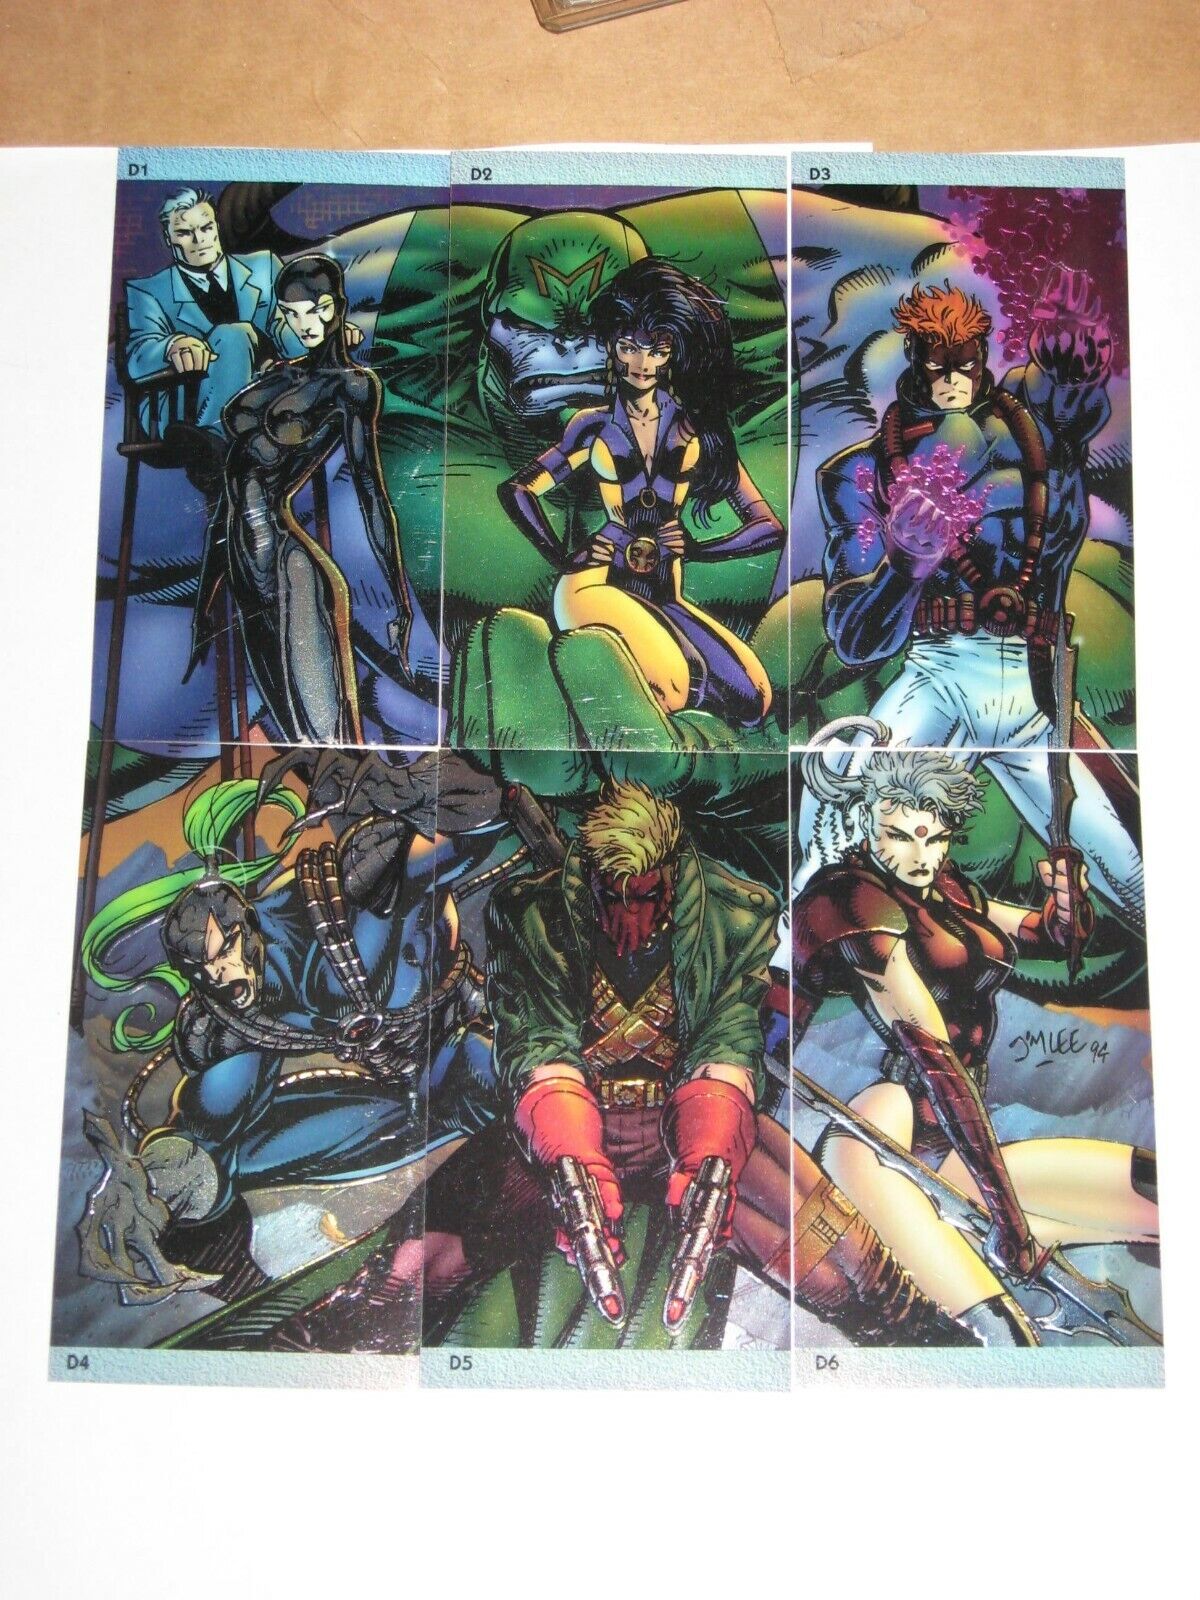 1994 WILDSTORM WILDCATS WIDEVISION DOUBLE SIDED PUZZLE INSERT 6 CARD SET D1 - D6